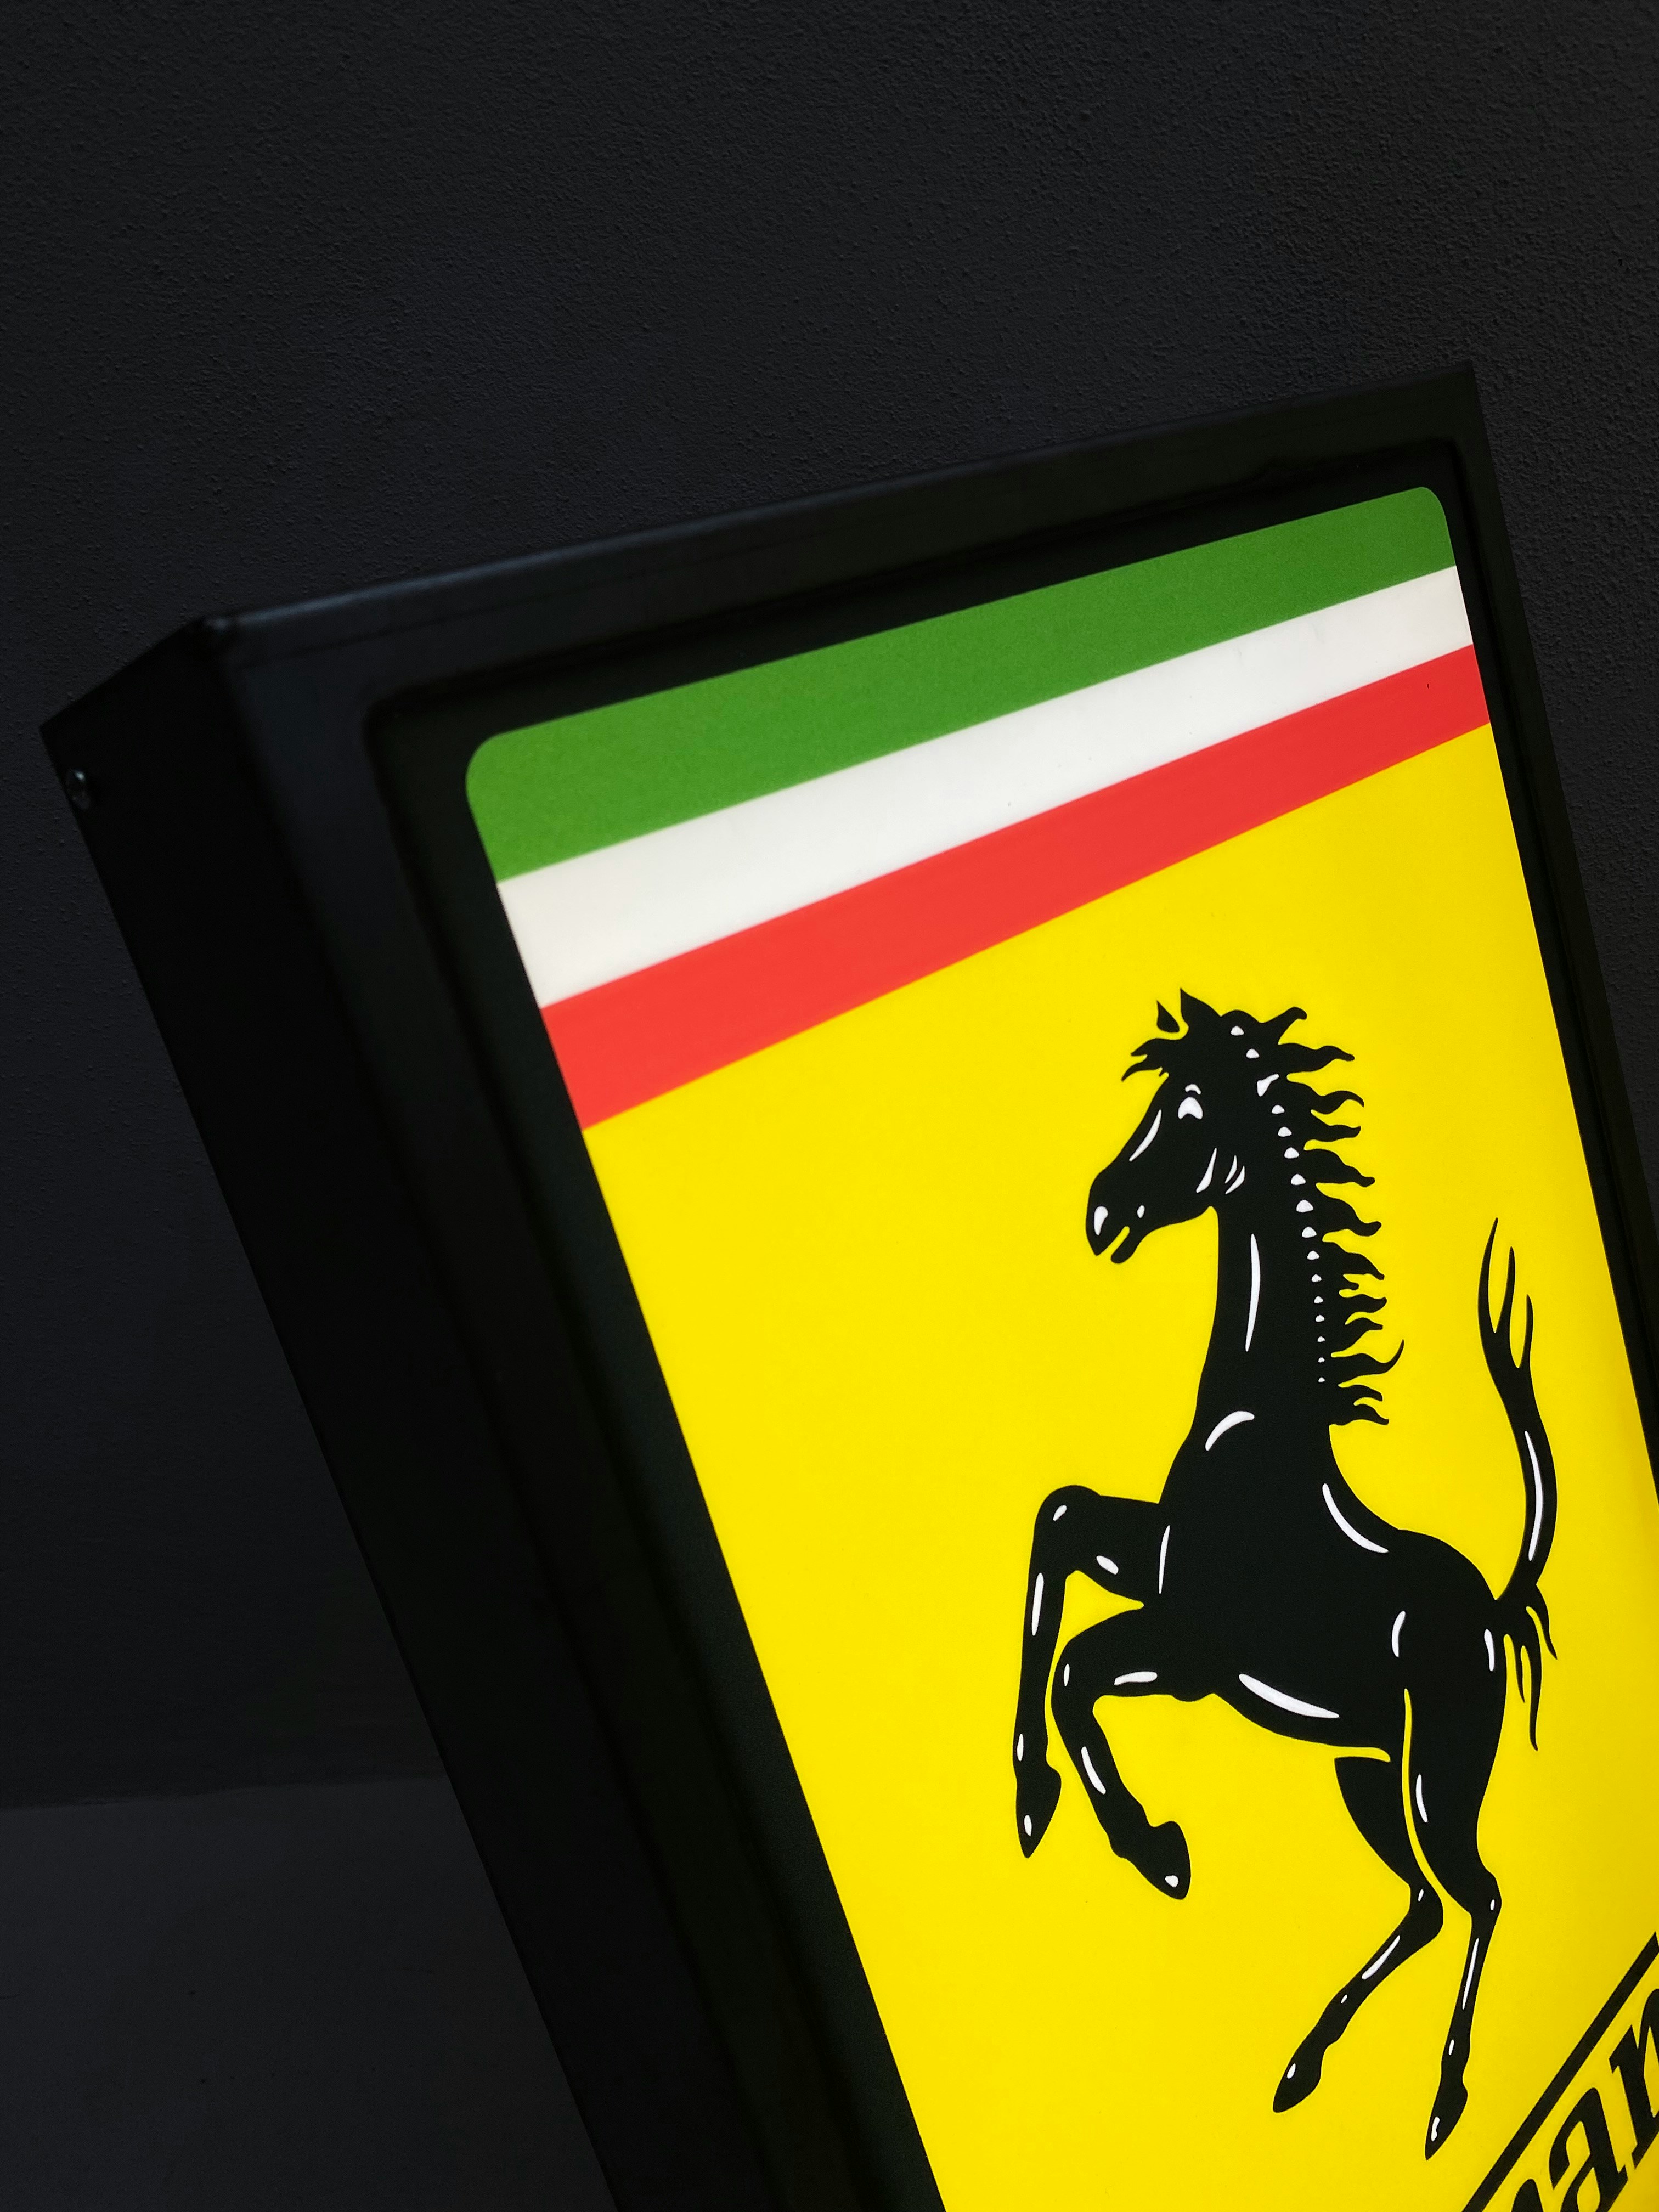 FERRARI ILLUMINATED SIGN for sale by auction in Milan , Italy